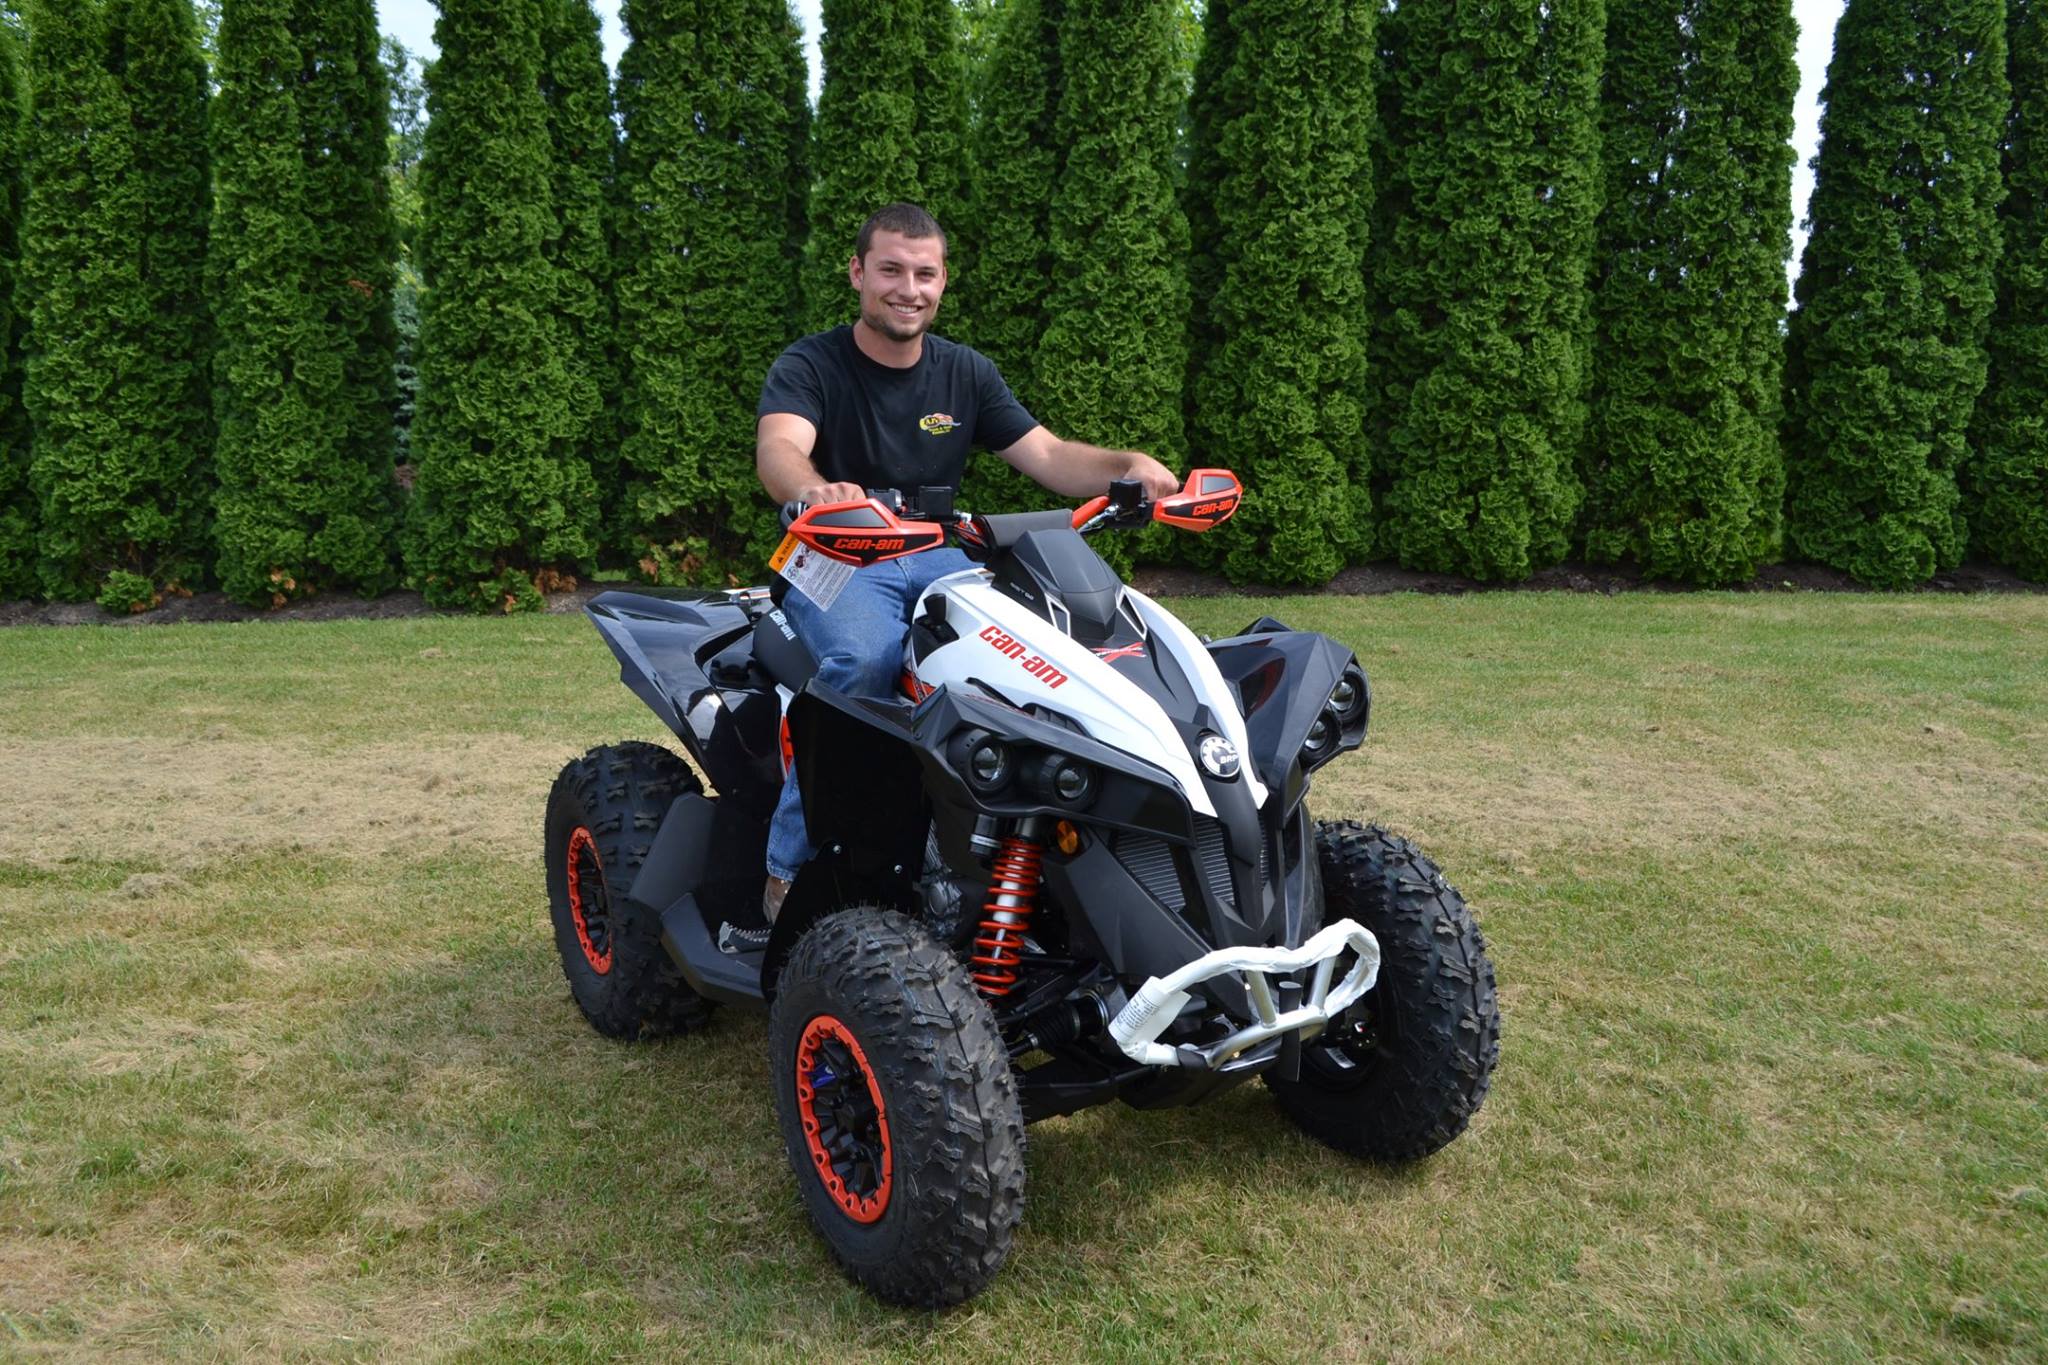 Chad Brooks, General Manager of Brooks PowerSports, Inc. poses on a new Can-Am Renegade ATV as it enters the dealership's inventory.